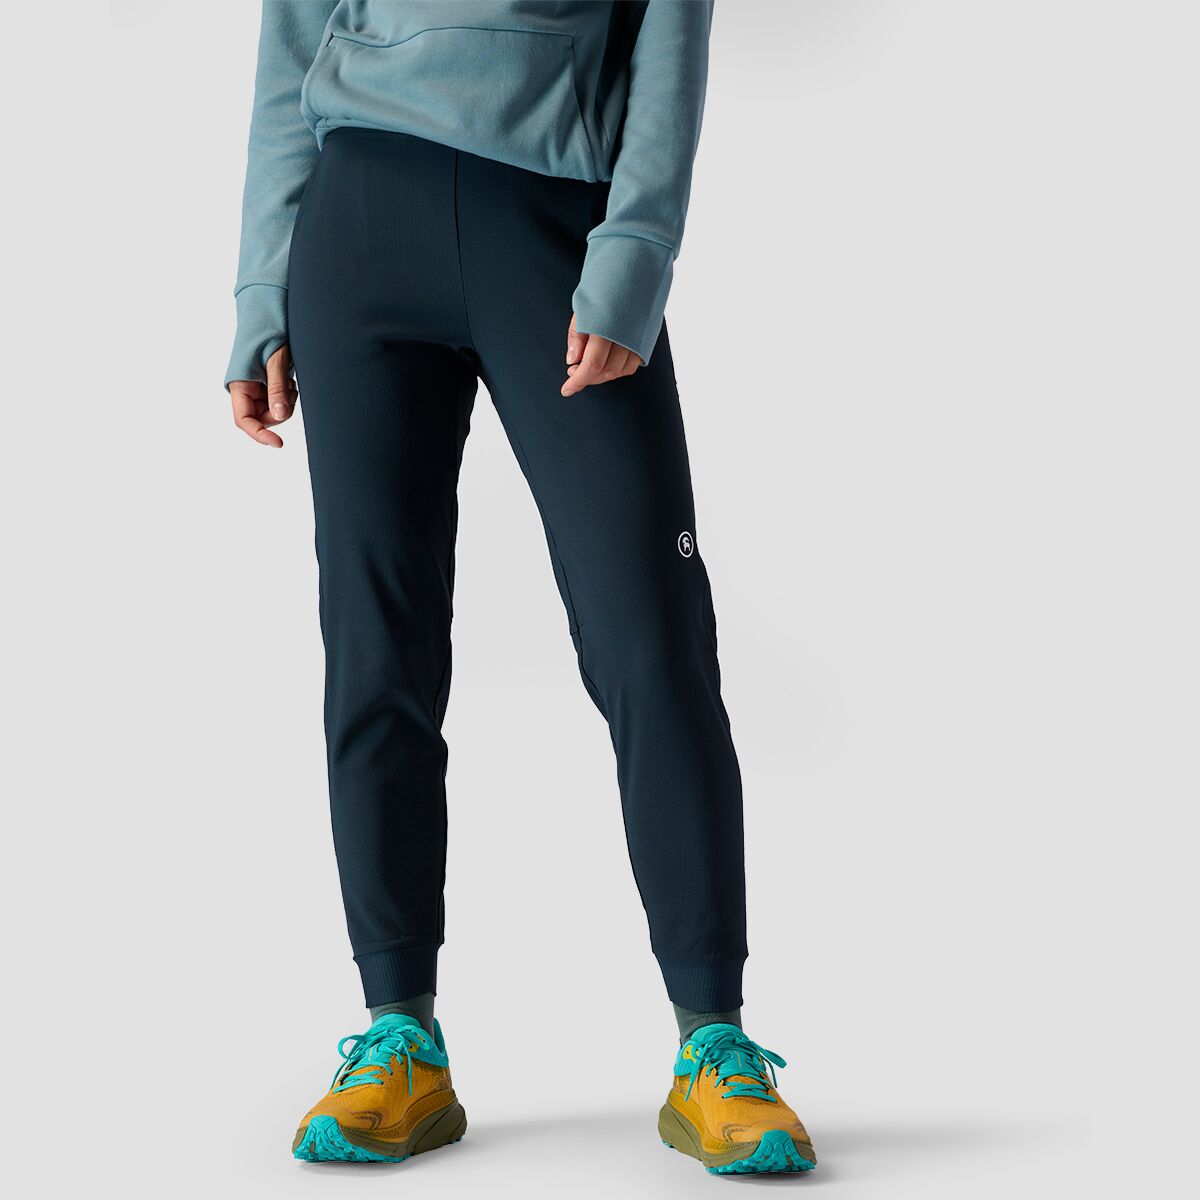 Softshell Fleece Lined On The Go Pant - Women